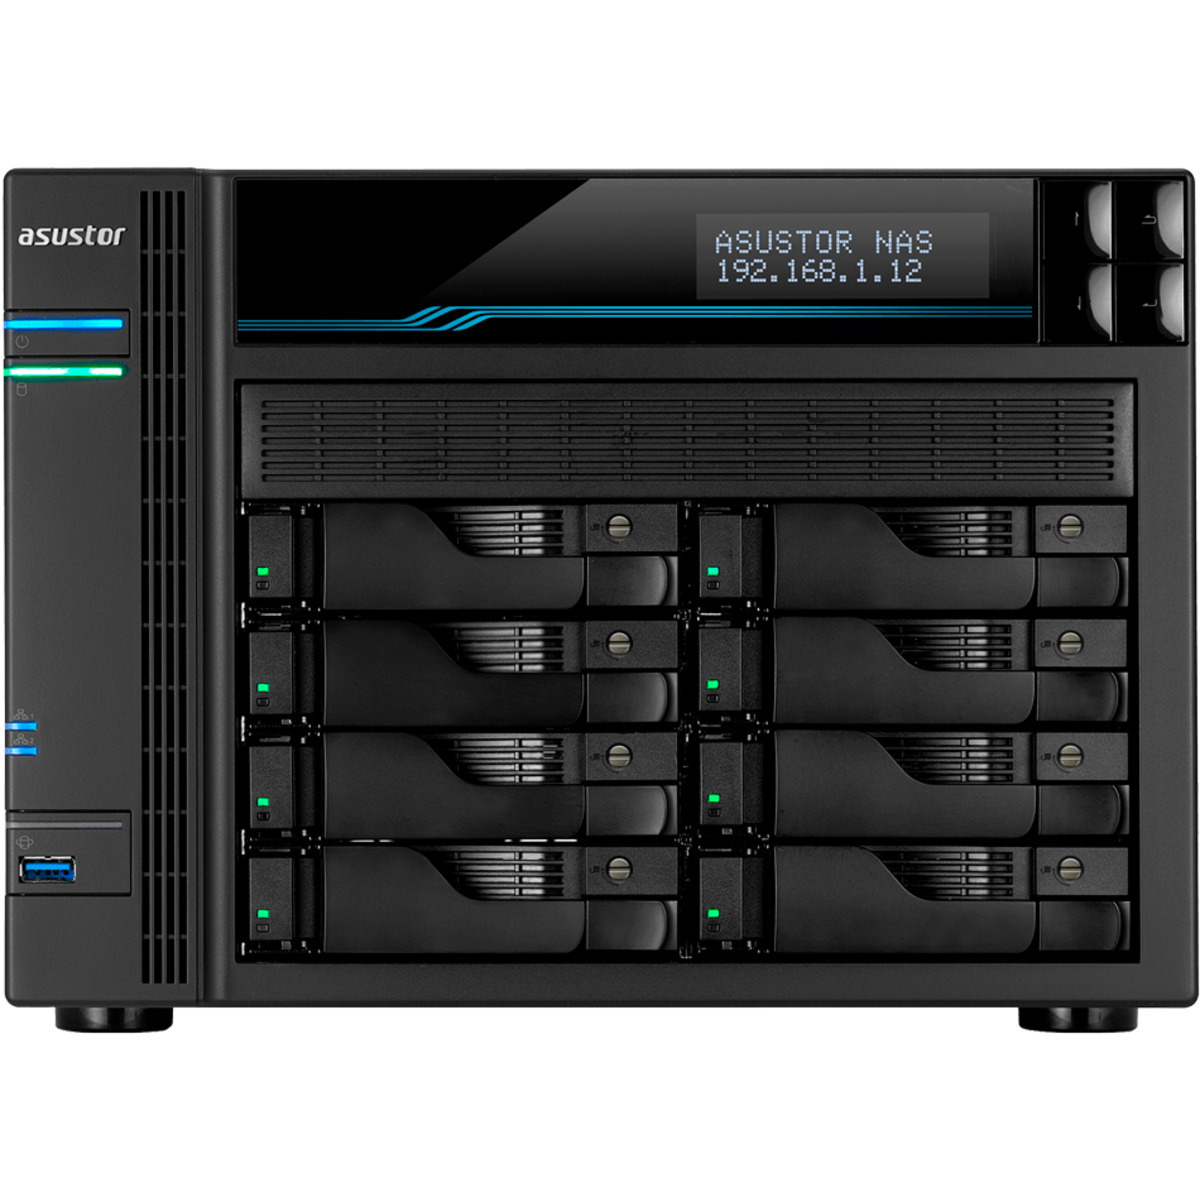 ASUSTOR AS6508T Lockerstor 8 8tb 8-Bay Desktop Multimedia / Power User / Business NAS - Network Attached Storage Device 4x2tb Seagate BarraCuda ST2000DM008 3.5 7200rpm SATA 6Gb/s HDD CONSUMER Class Drives Installed - Burn-In Tested - ON SALE - FREE RAM UPGRADE AS6508T Lockerstor 8